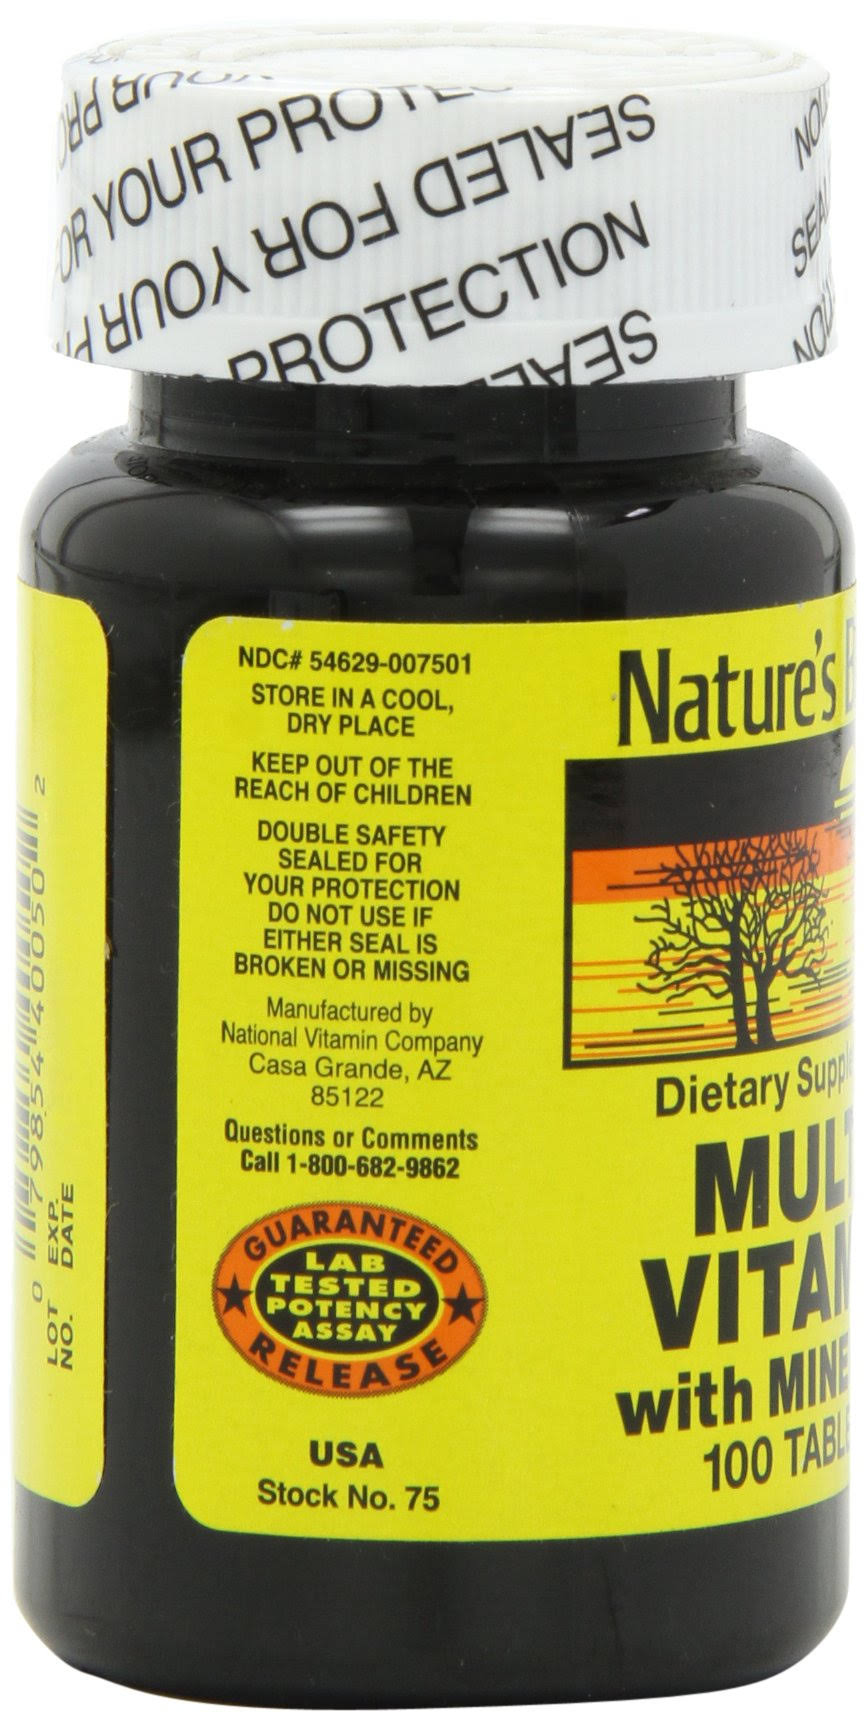 Nature's Blend Multi Vitamin with Minerals - 100ct